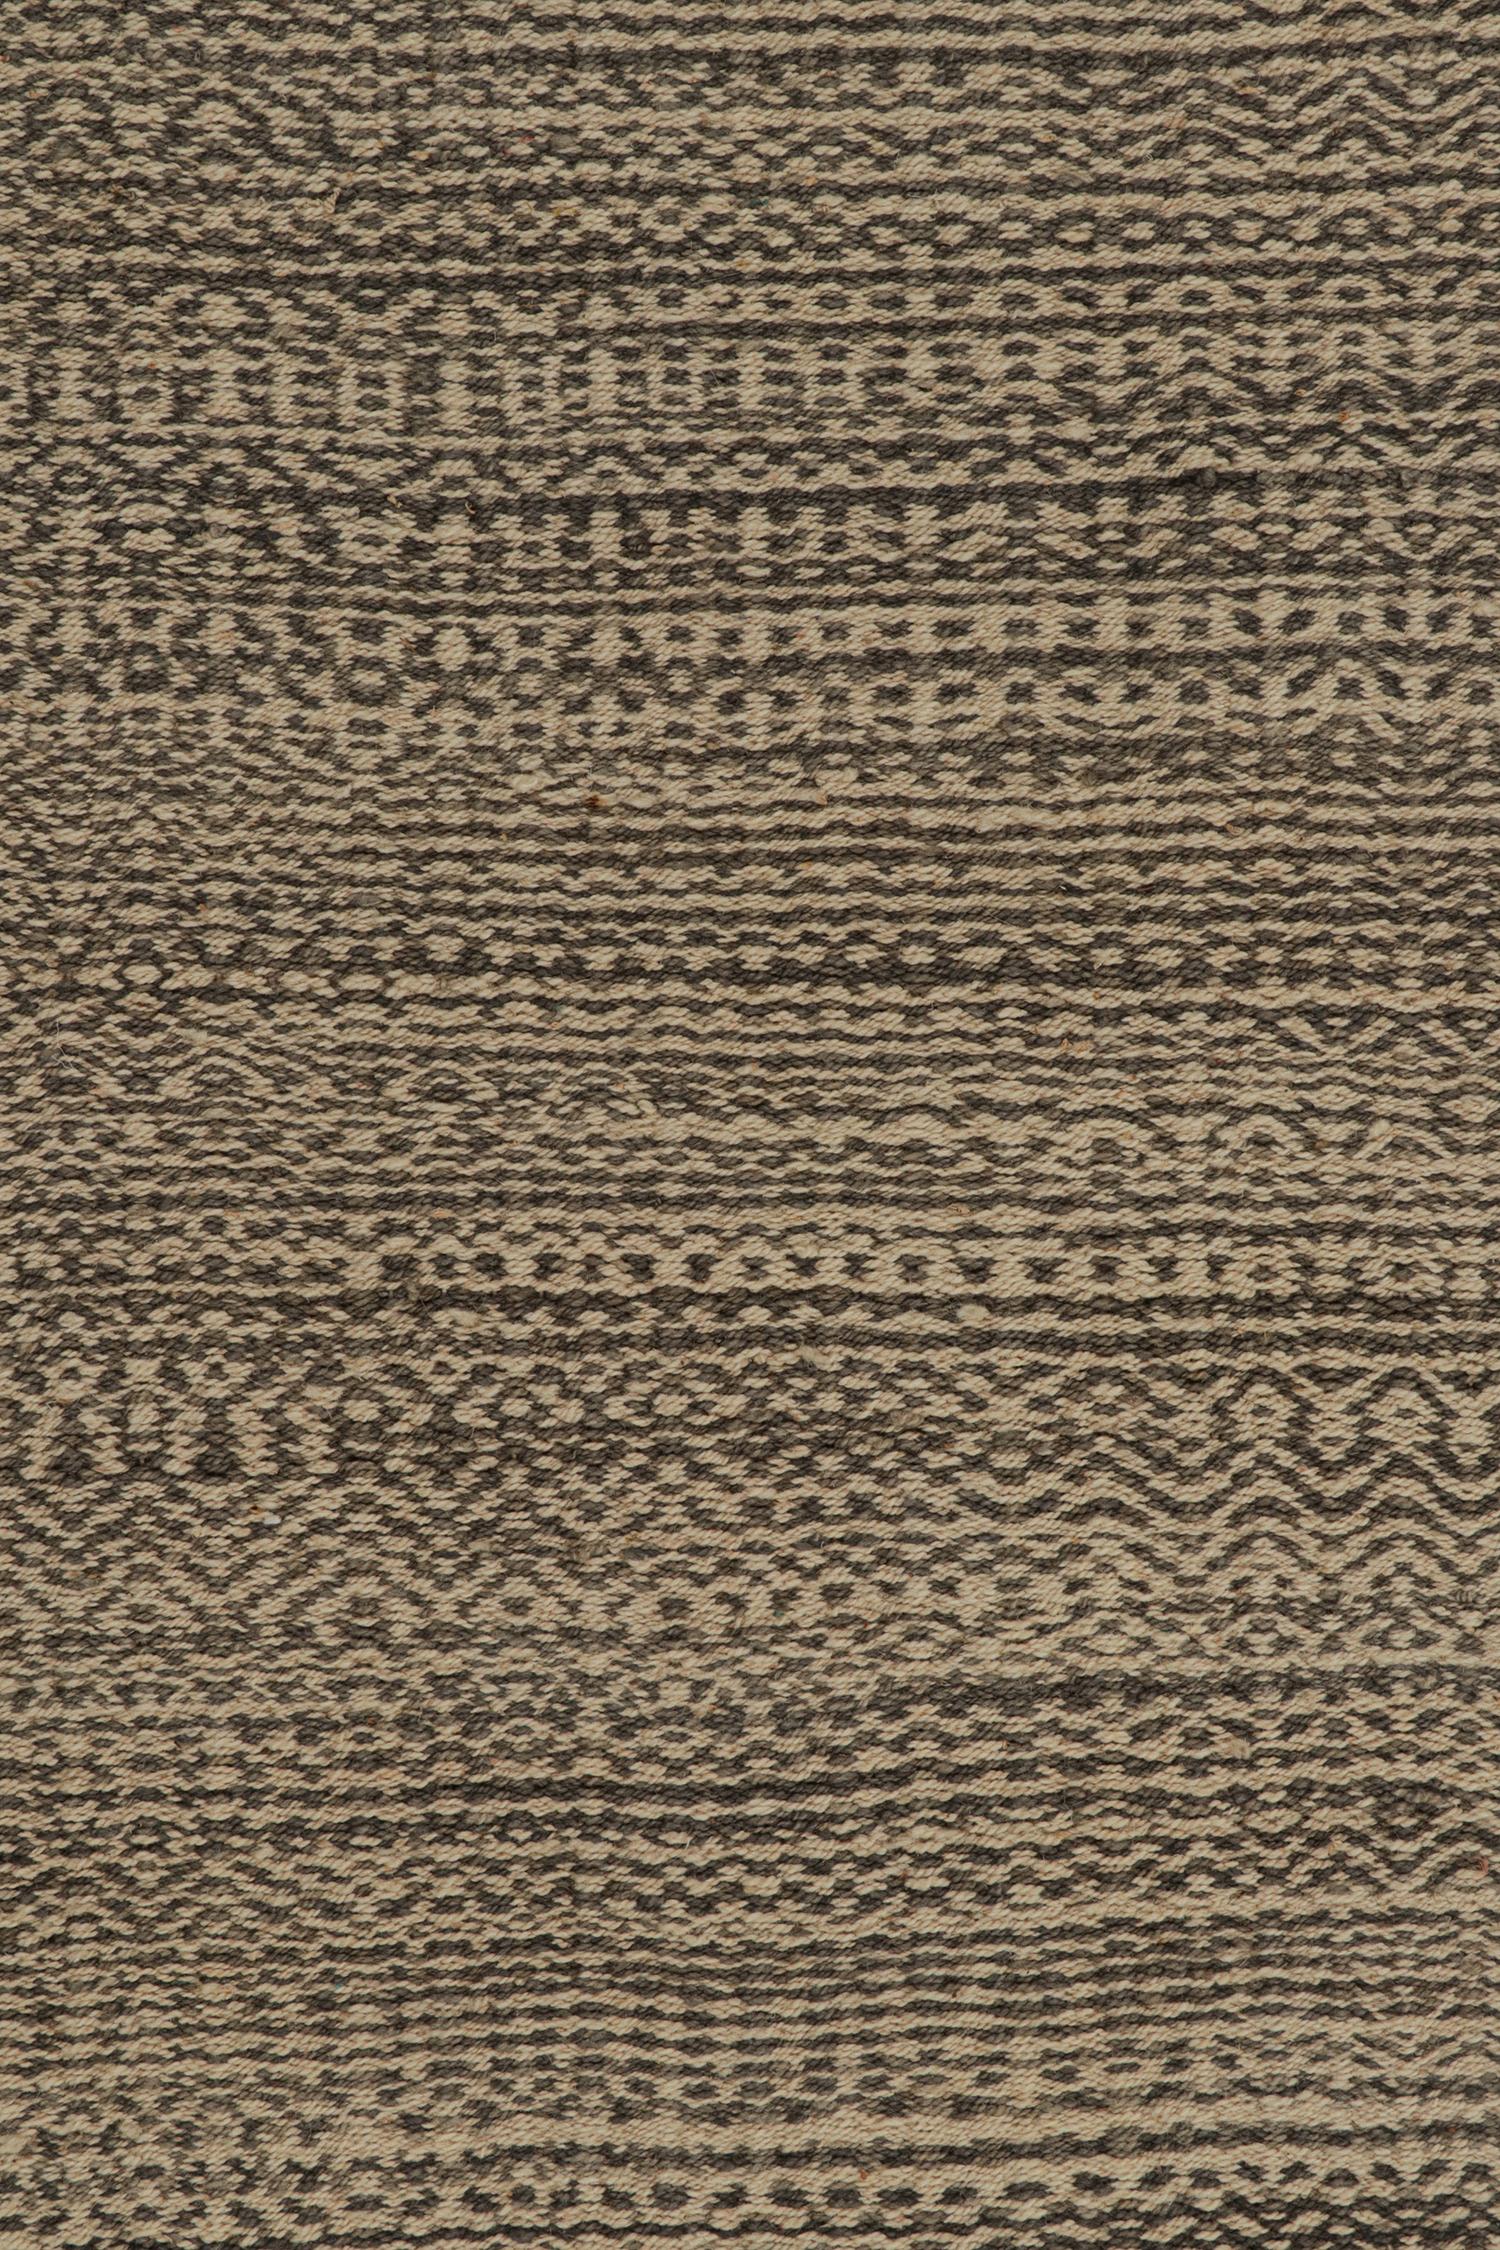 Rug & Kilim’s Contemporary Persian Kilim in Beige-Brown Stripes In New Condition For Sale In Long Island City, NY